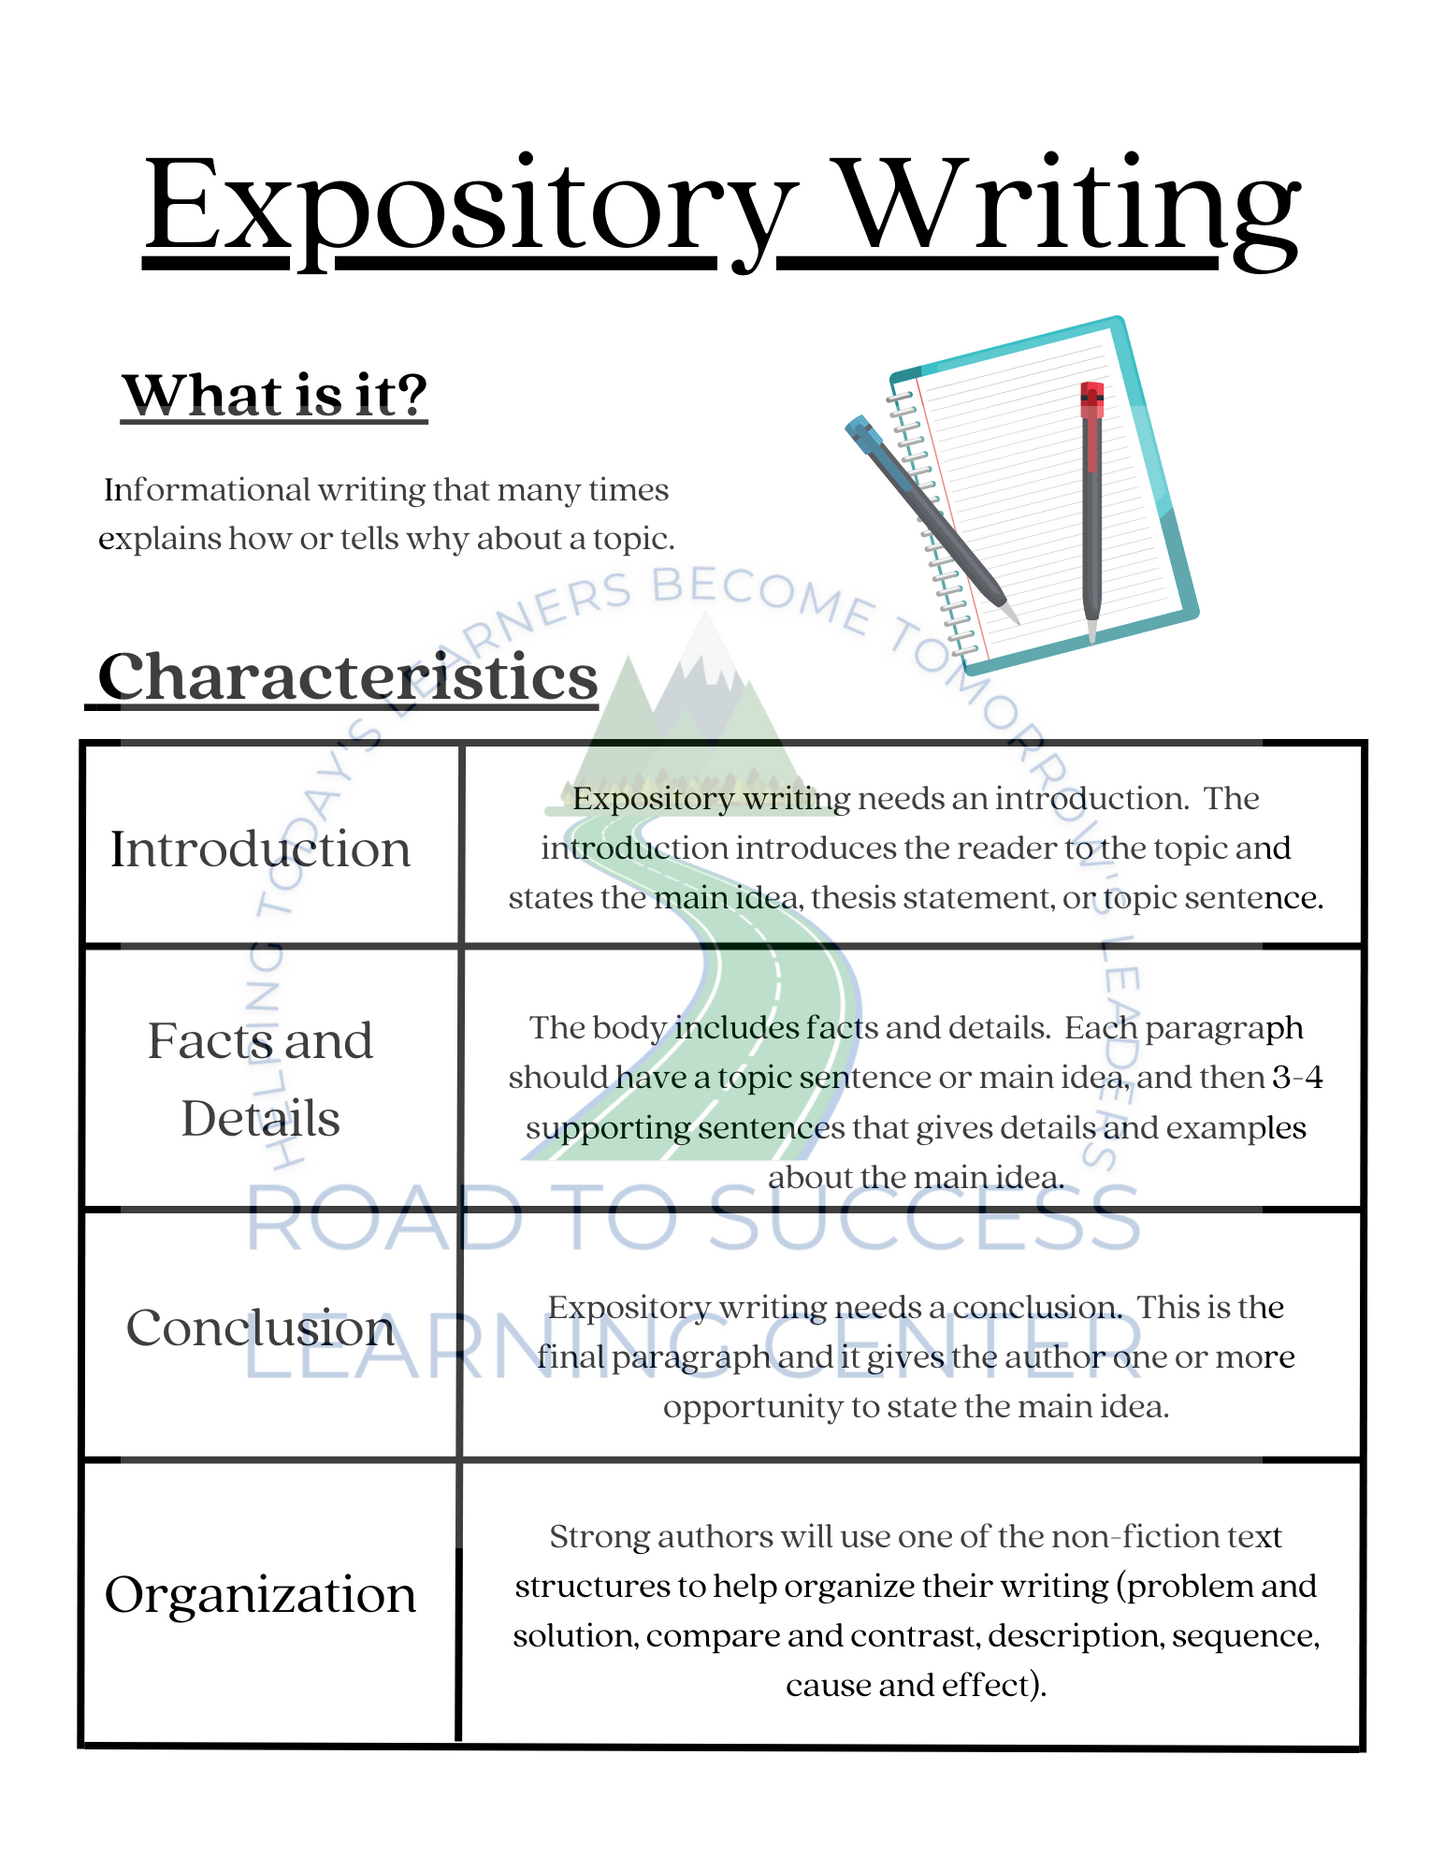 Types of Writing for Middle School